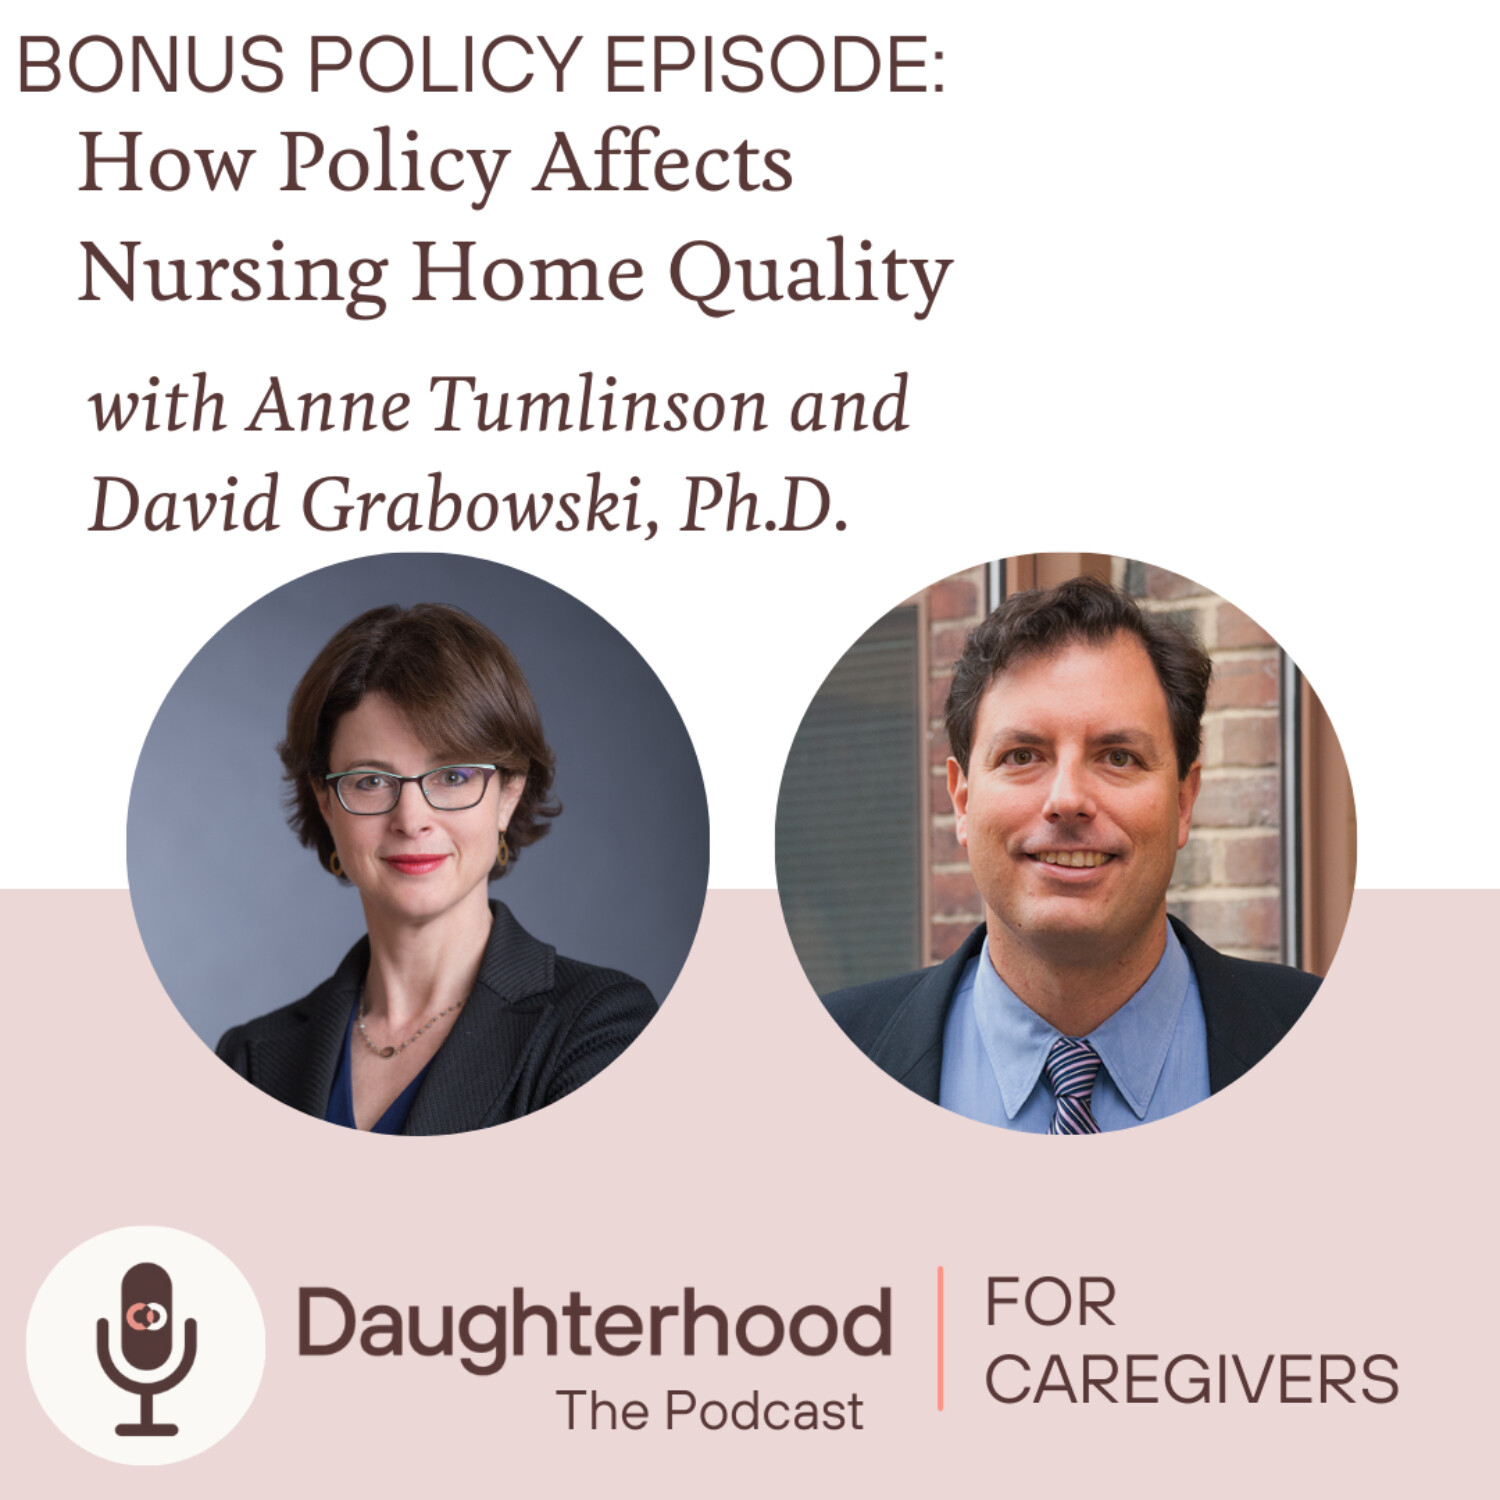 BONUS - How Policy Affects Nursing Home Quality with Anne Tumlinson and David Grabowski, Ph.D.